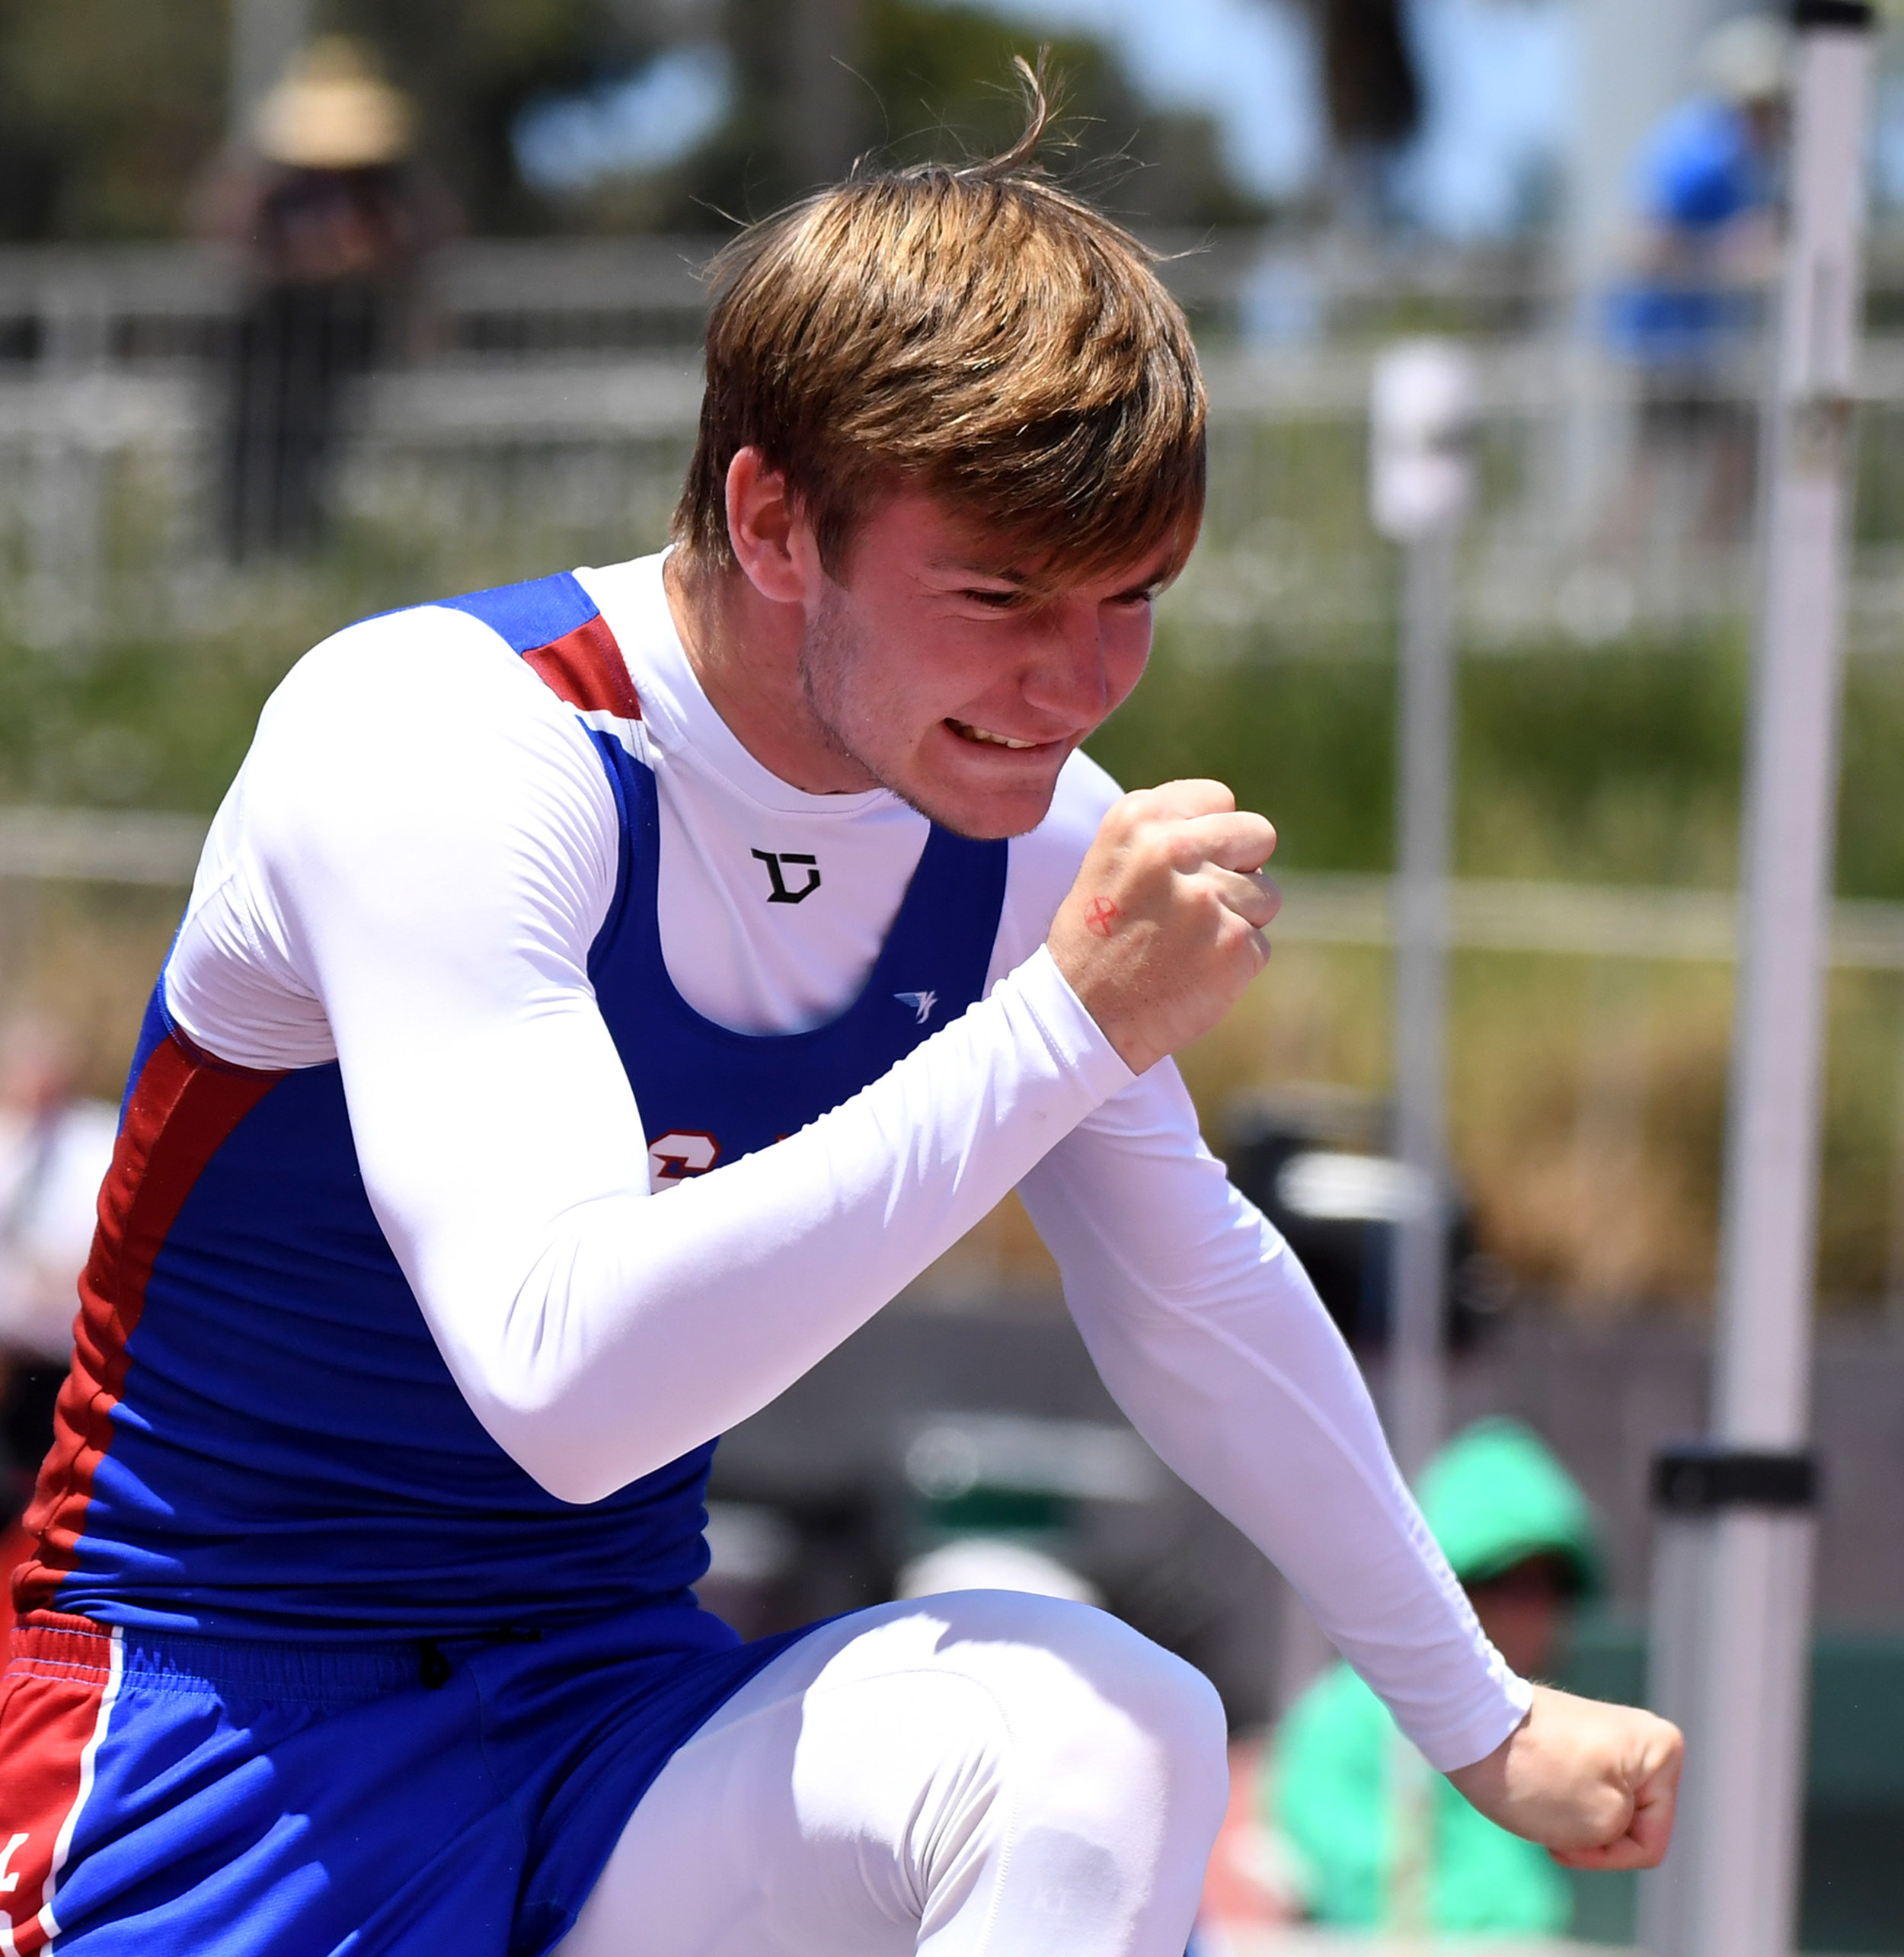  Los Alamitos' Kevin Schmitt finished second in the high jump during the CIF-SS Track and Field Masters meet at El Camino College in Torrance, Calif., on Saturday, May 26, 2018.  